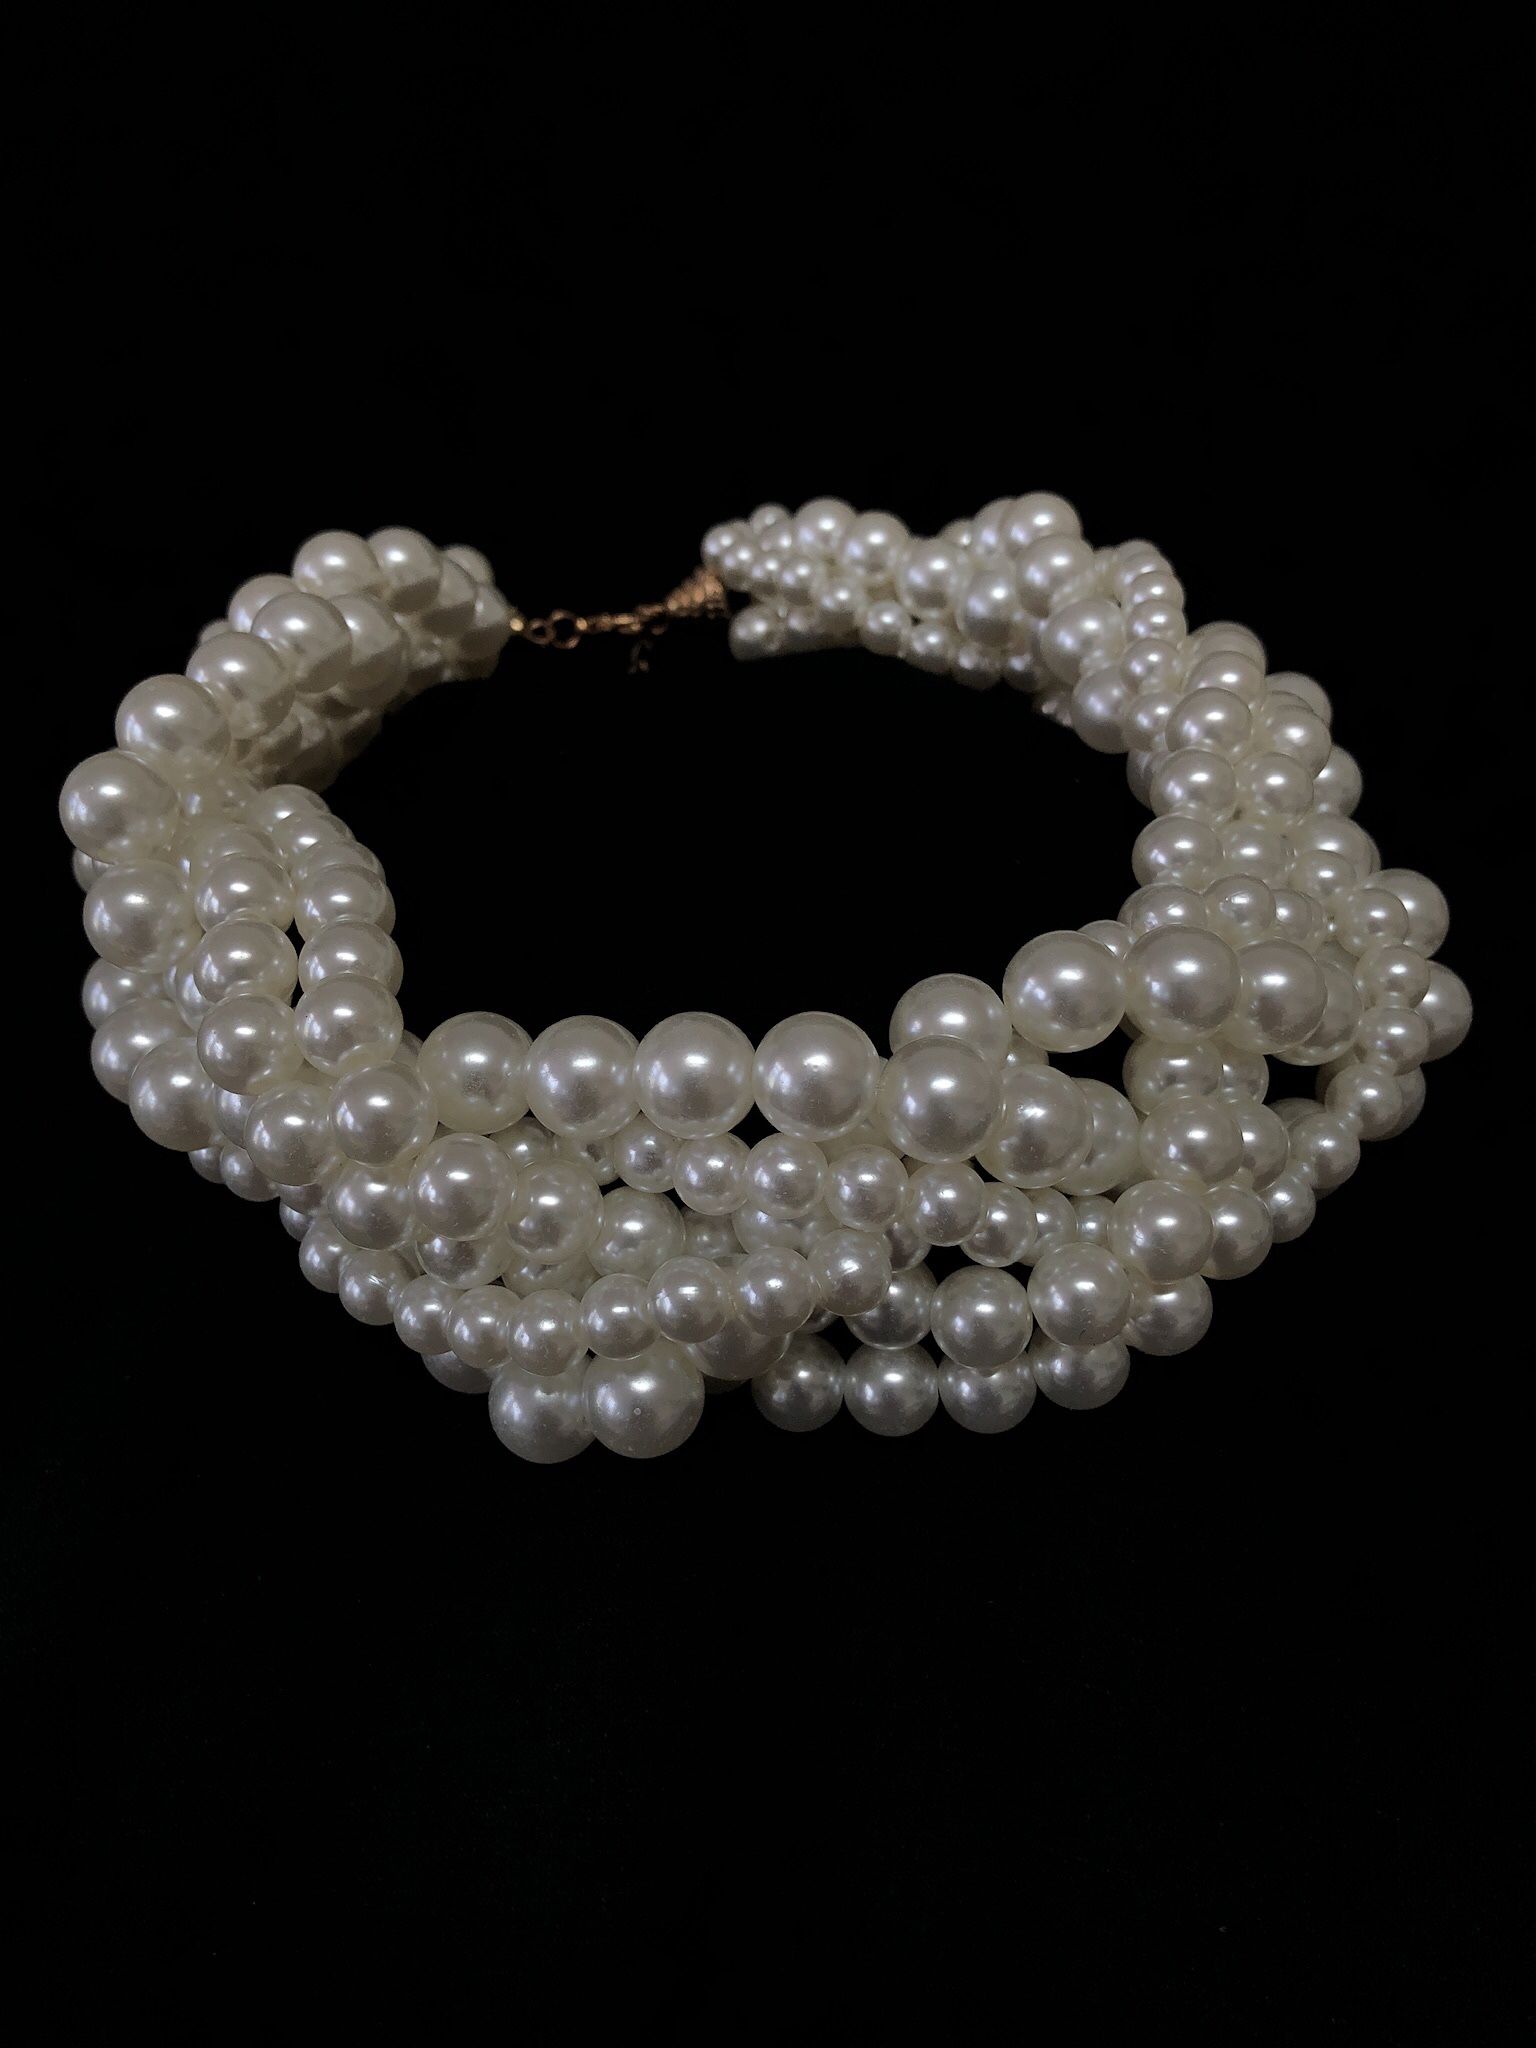 New!  Pearl Necklace - Multi Strands Of Simulated Pearls